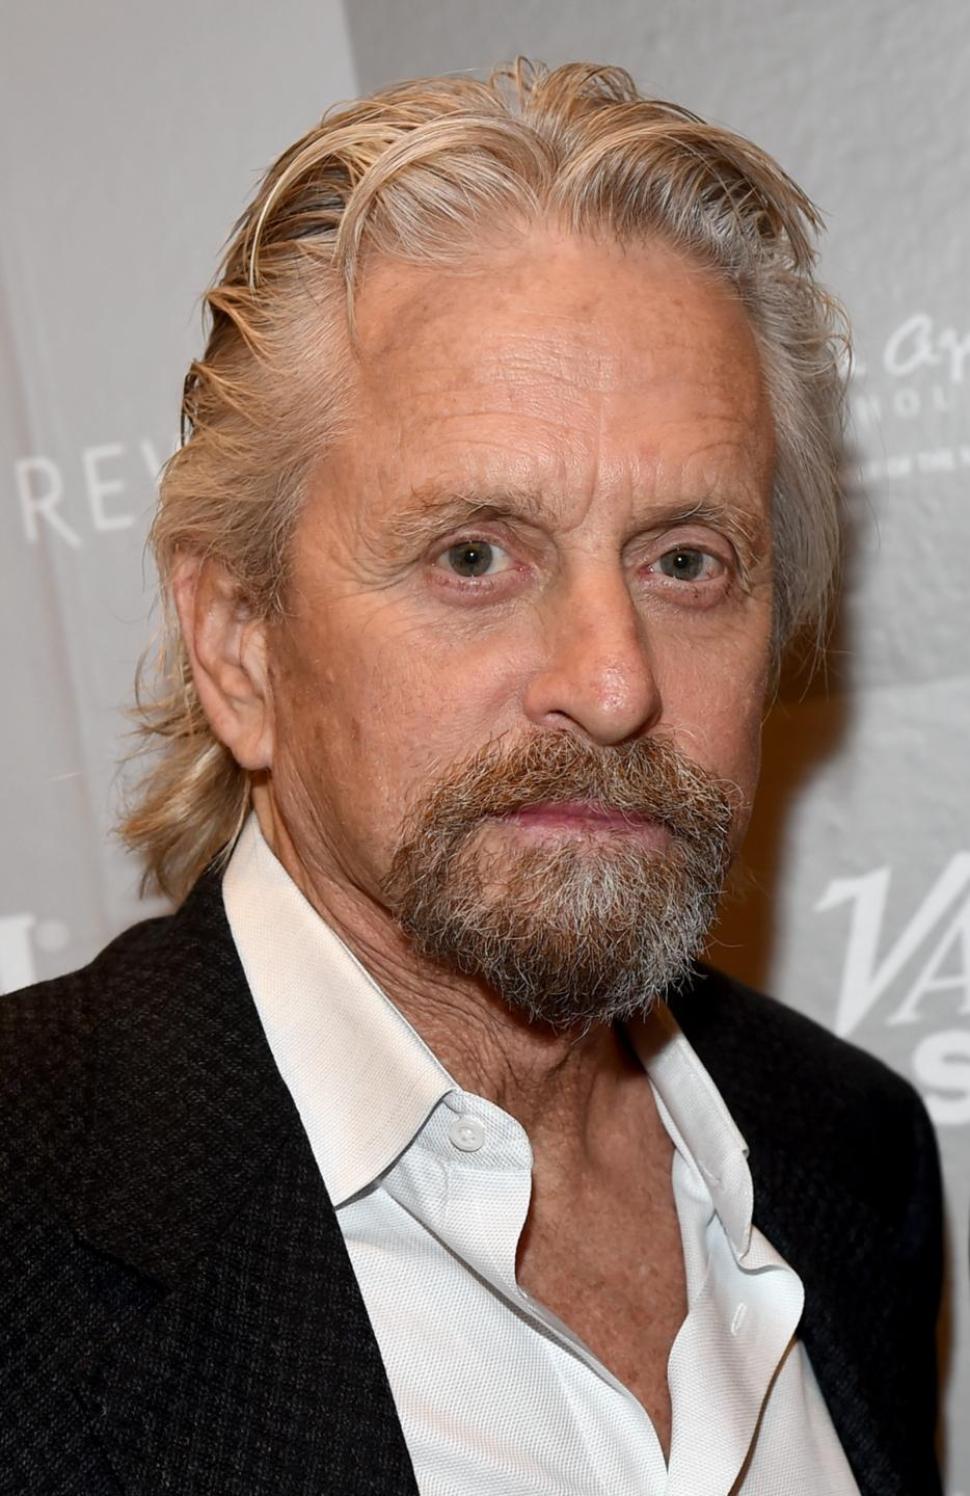 TORONTO, ON - SEPTEMBER 06: Actor Michael Douglas attends day 2 of the Variety Studio presented by Moroccanoil at Holt Renfrew during the 2014 Toronto International Film Festival on September 6, 2014 in Toronto, Canada. (Photo by Michael Buckner/Getty Images for Variety)